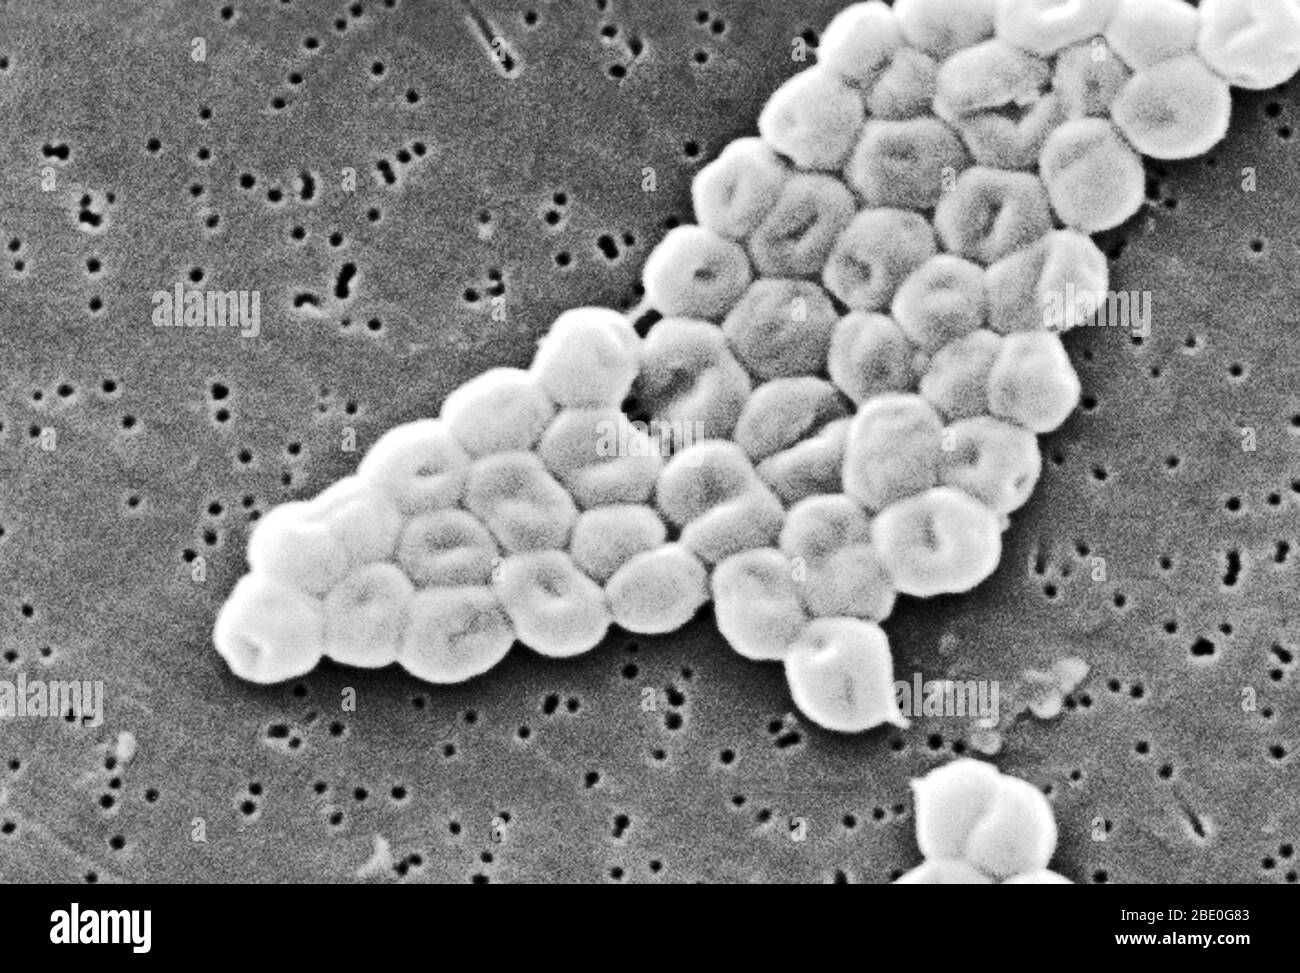 SEM depicts a highly magnified cluster of Gram-negative, non-motile Acinetobacter baumannii bacteria; Mag - 13331x. Members of the genus Acinetobacter are nonmotile rods, 1-1.5µm in diameter, and 1.5-2.5µm in length, becoming spherical in shape while in their stationary phase of growth. Acinetobacter baumannii is a species of pathogenic bacteria, referred to as an aerobic gram-negative bacterium, that is resistant to most antibiotics. As a result of its resistance to drug treatment, some estimates state the disease is killing tens of thousands of U.S. hospital patients each year. The illness c Stock Photo